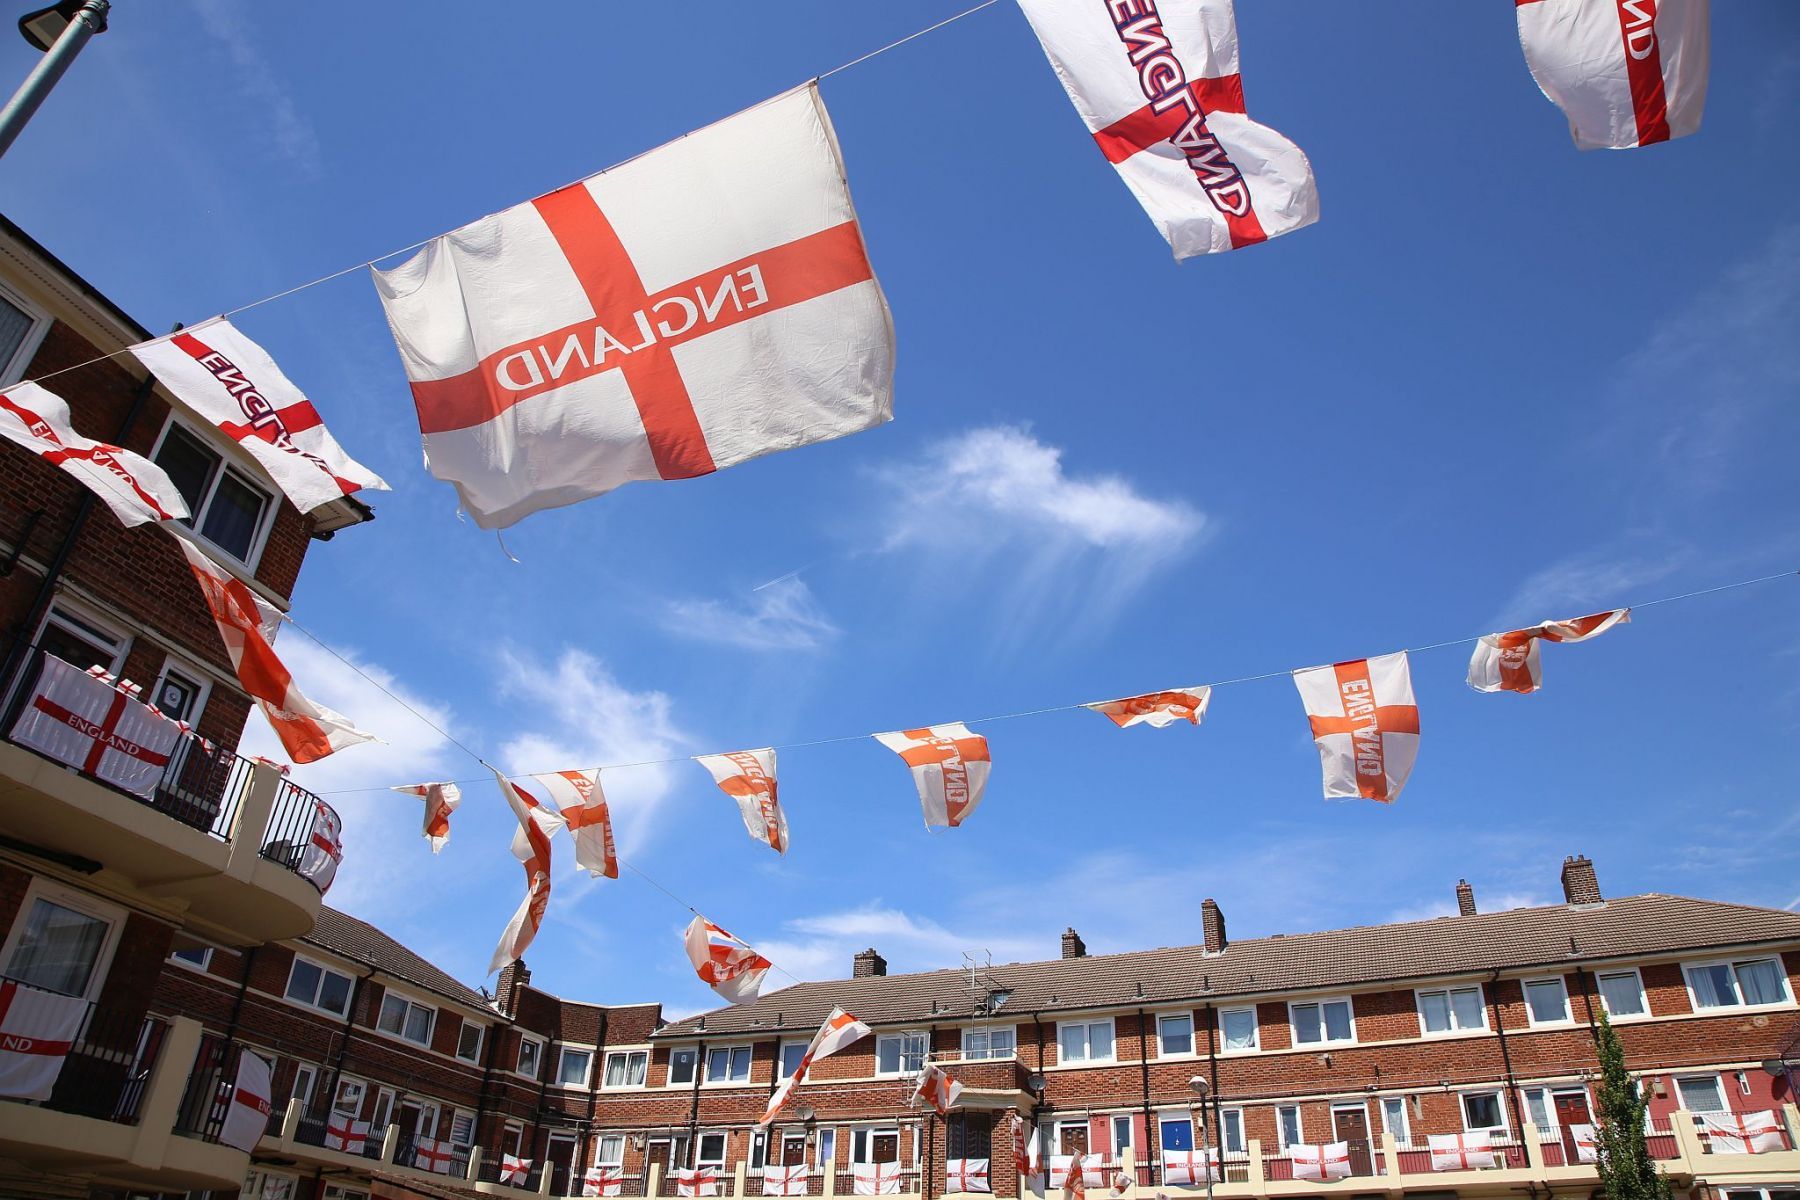 England flags flying from the flat's balconies and strung between lampposts on the Kirby Estate in Bermondsey, SE London